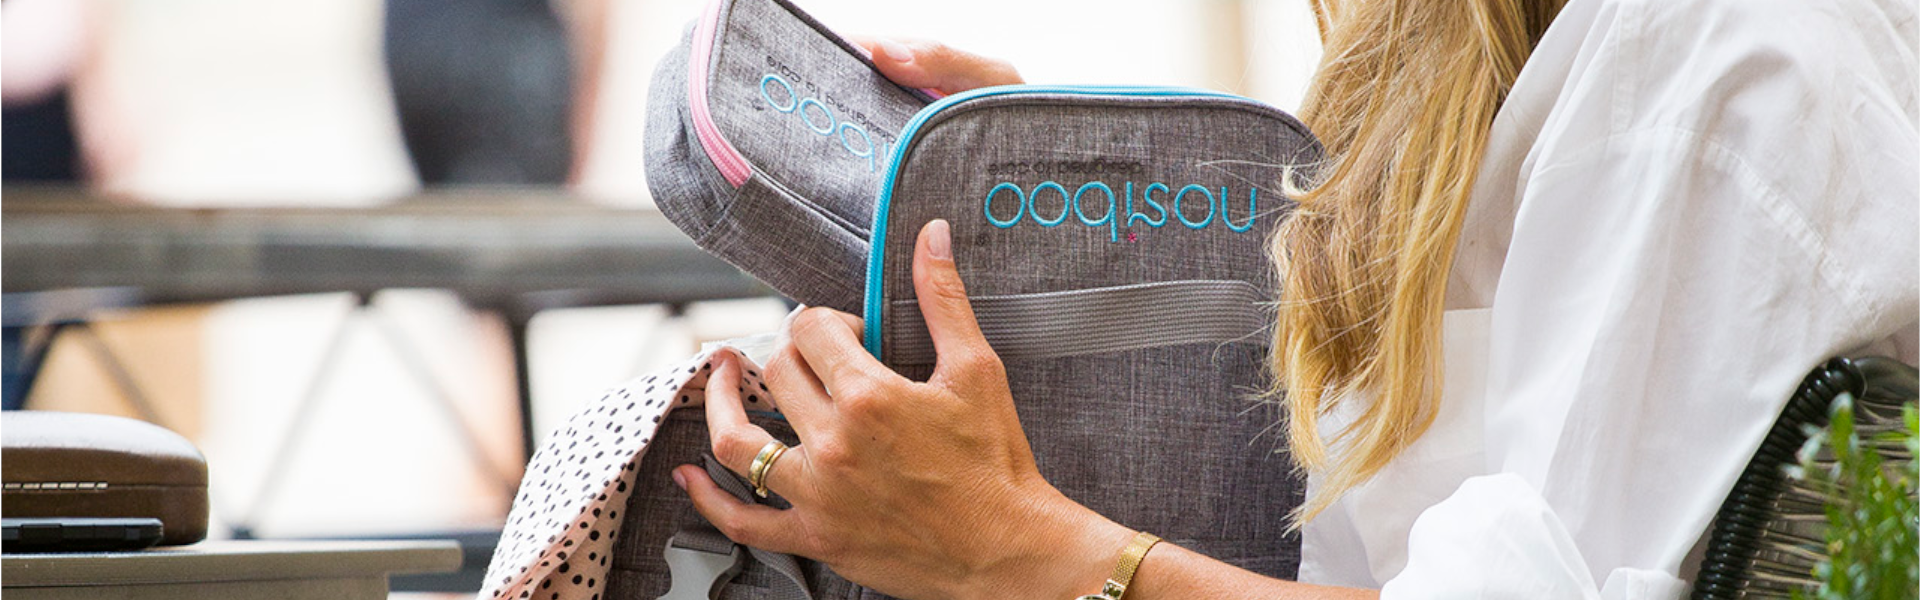 A stylish woman in a café putting the Nosiboo Bag Toiletry Bag into the Nosiboo Bag Baby Organizer